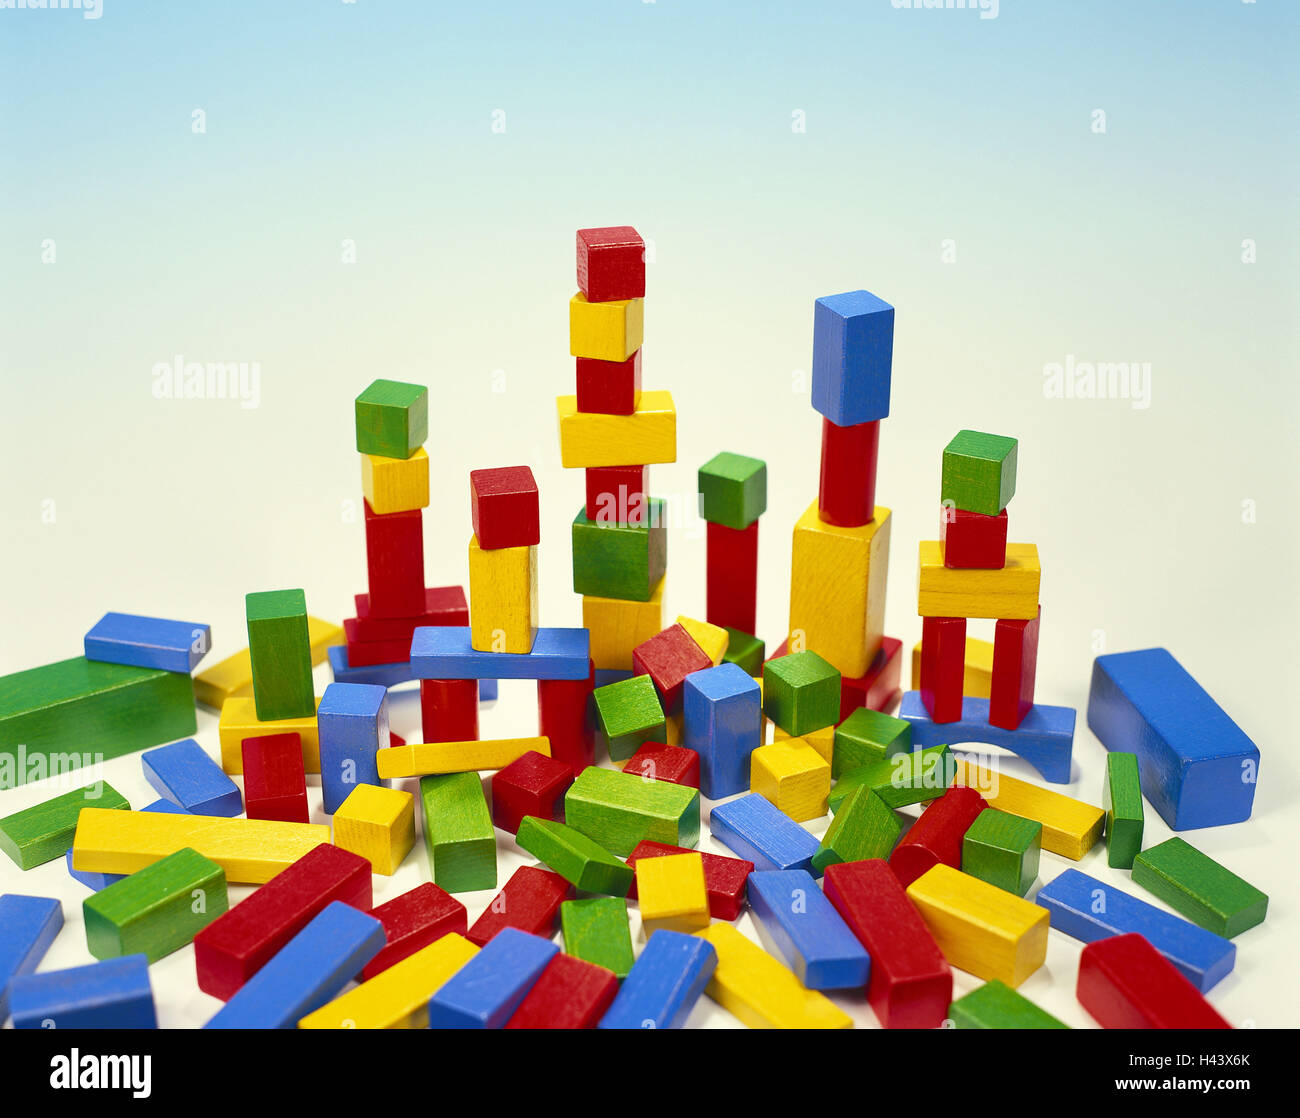 Timber-frame construction blocks, brightly, building blocks, blocks, chunks wood, building blocks, toys, wooden toys, towers, batches, play, stack, build, learn, play, colours, passed away, cut outs, studio, Stock Photo